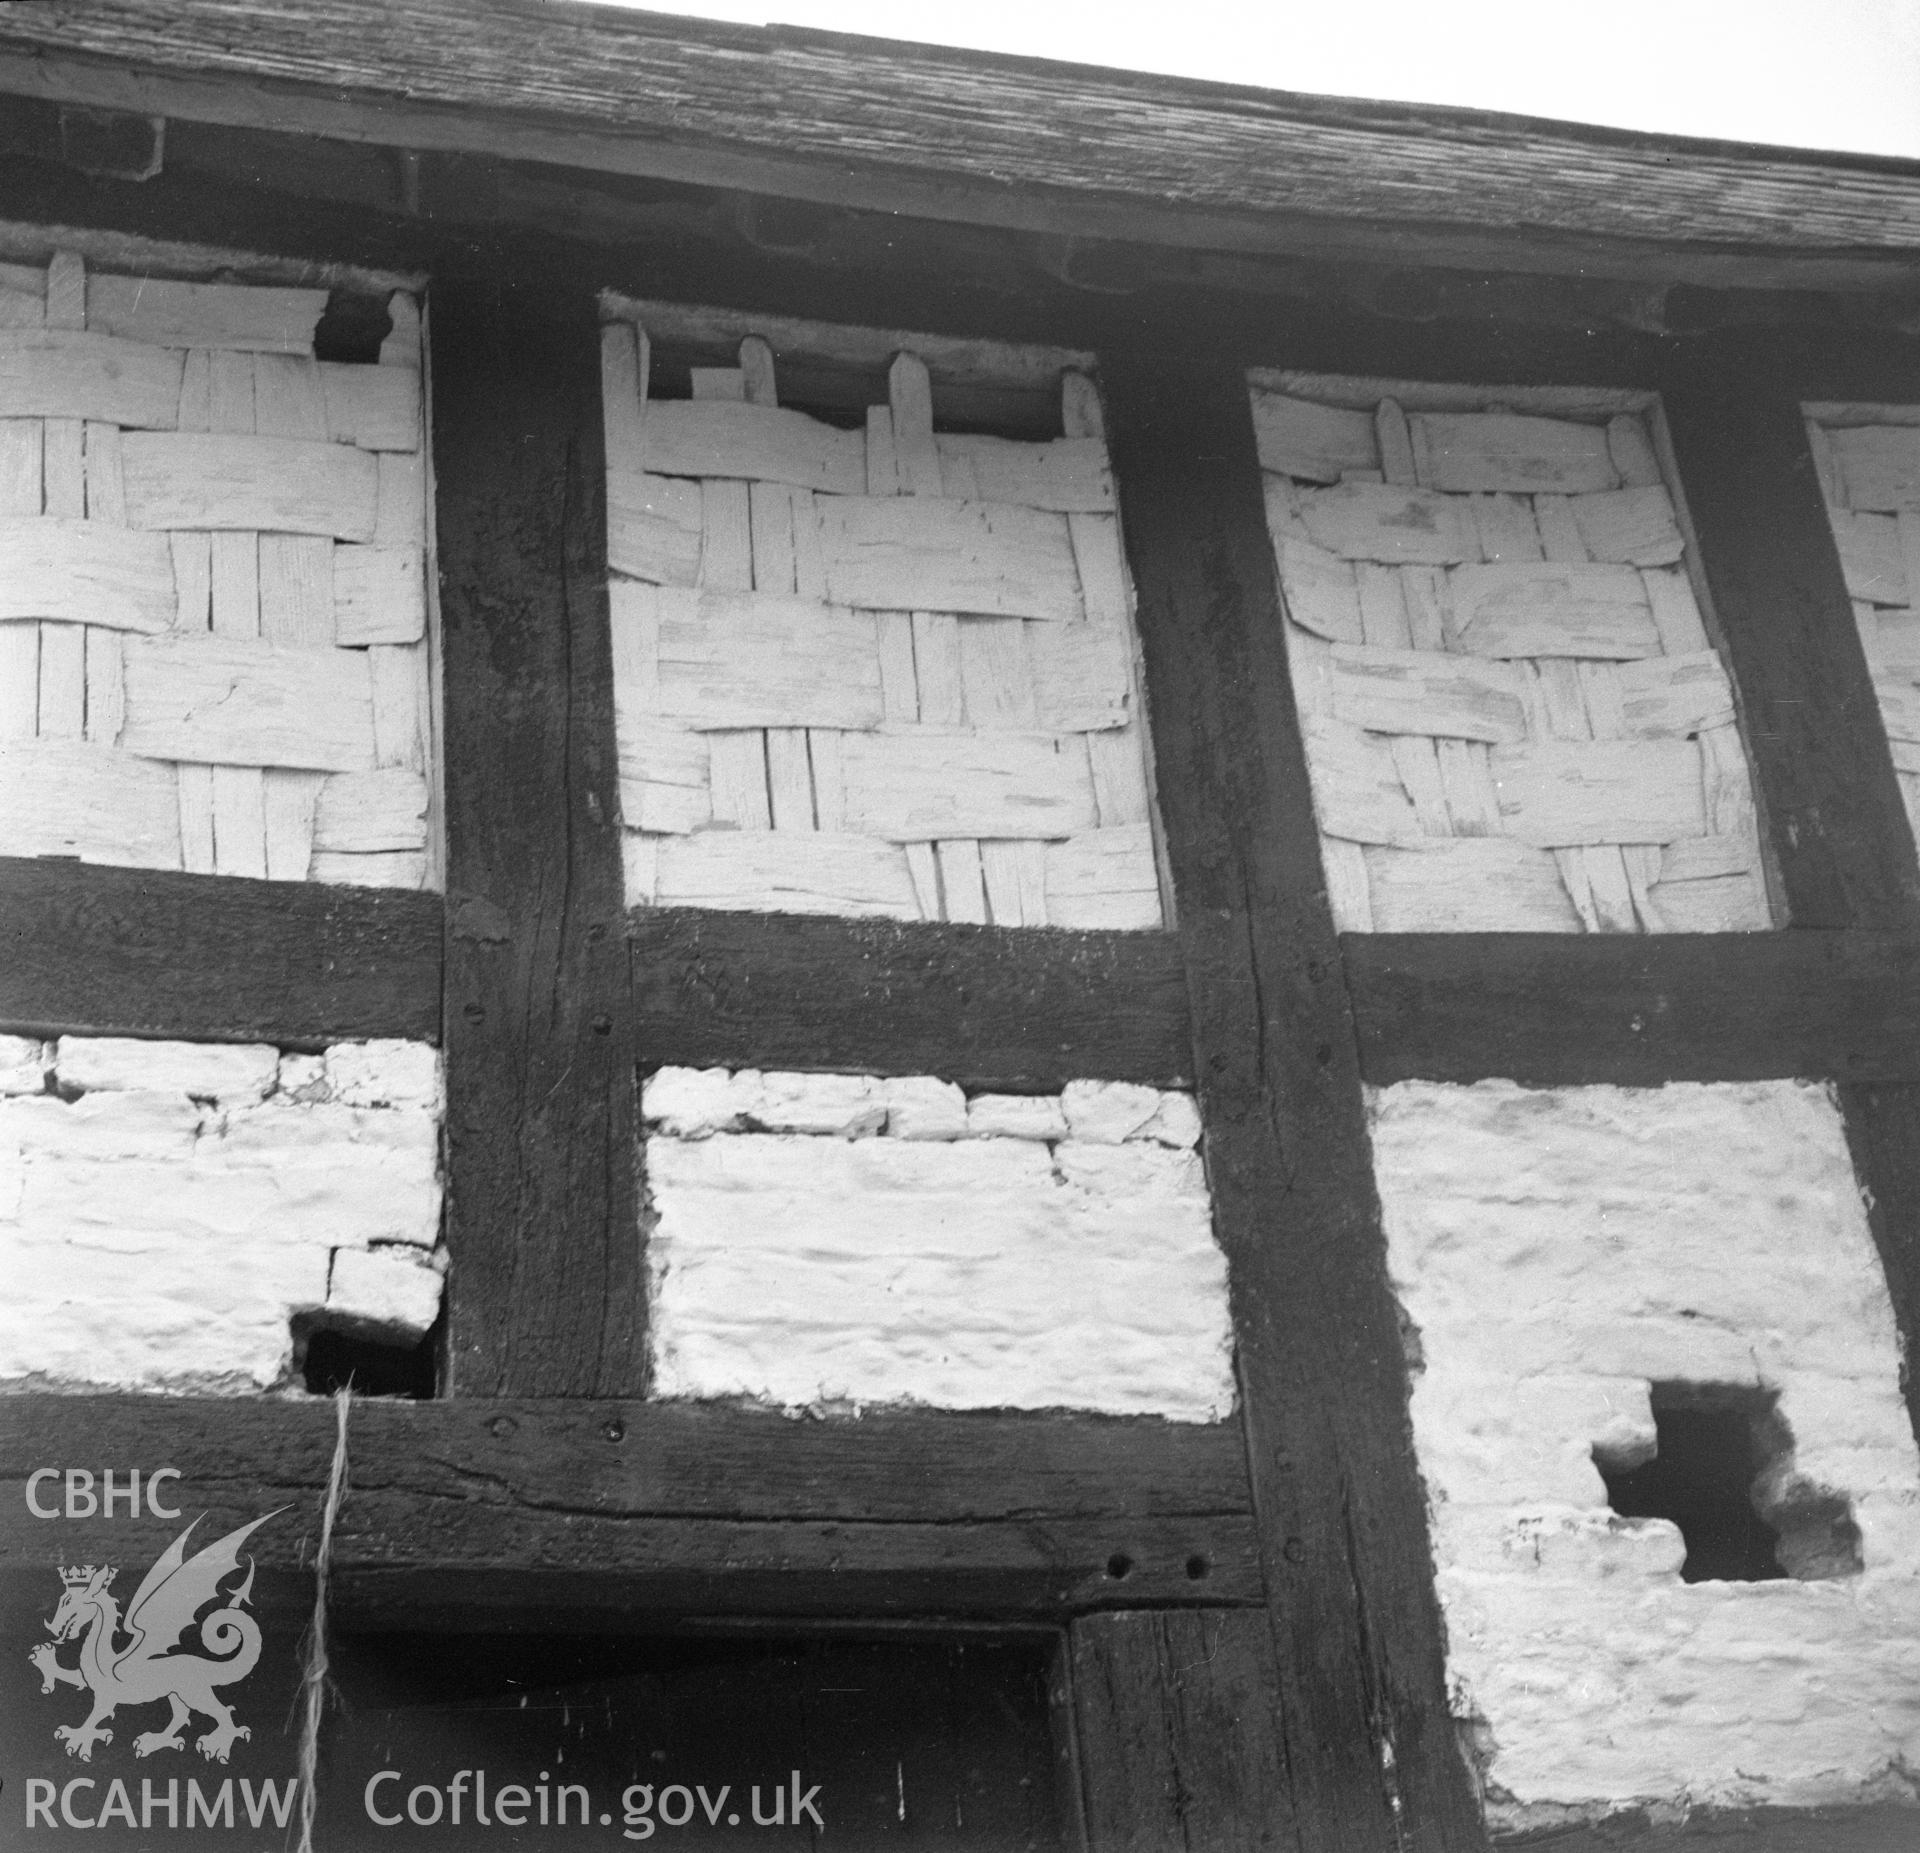 Digital copy of a nitrate negative showing timber detail of barn at Cefn Coch, Ruthin, Denbighshire.